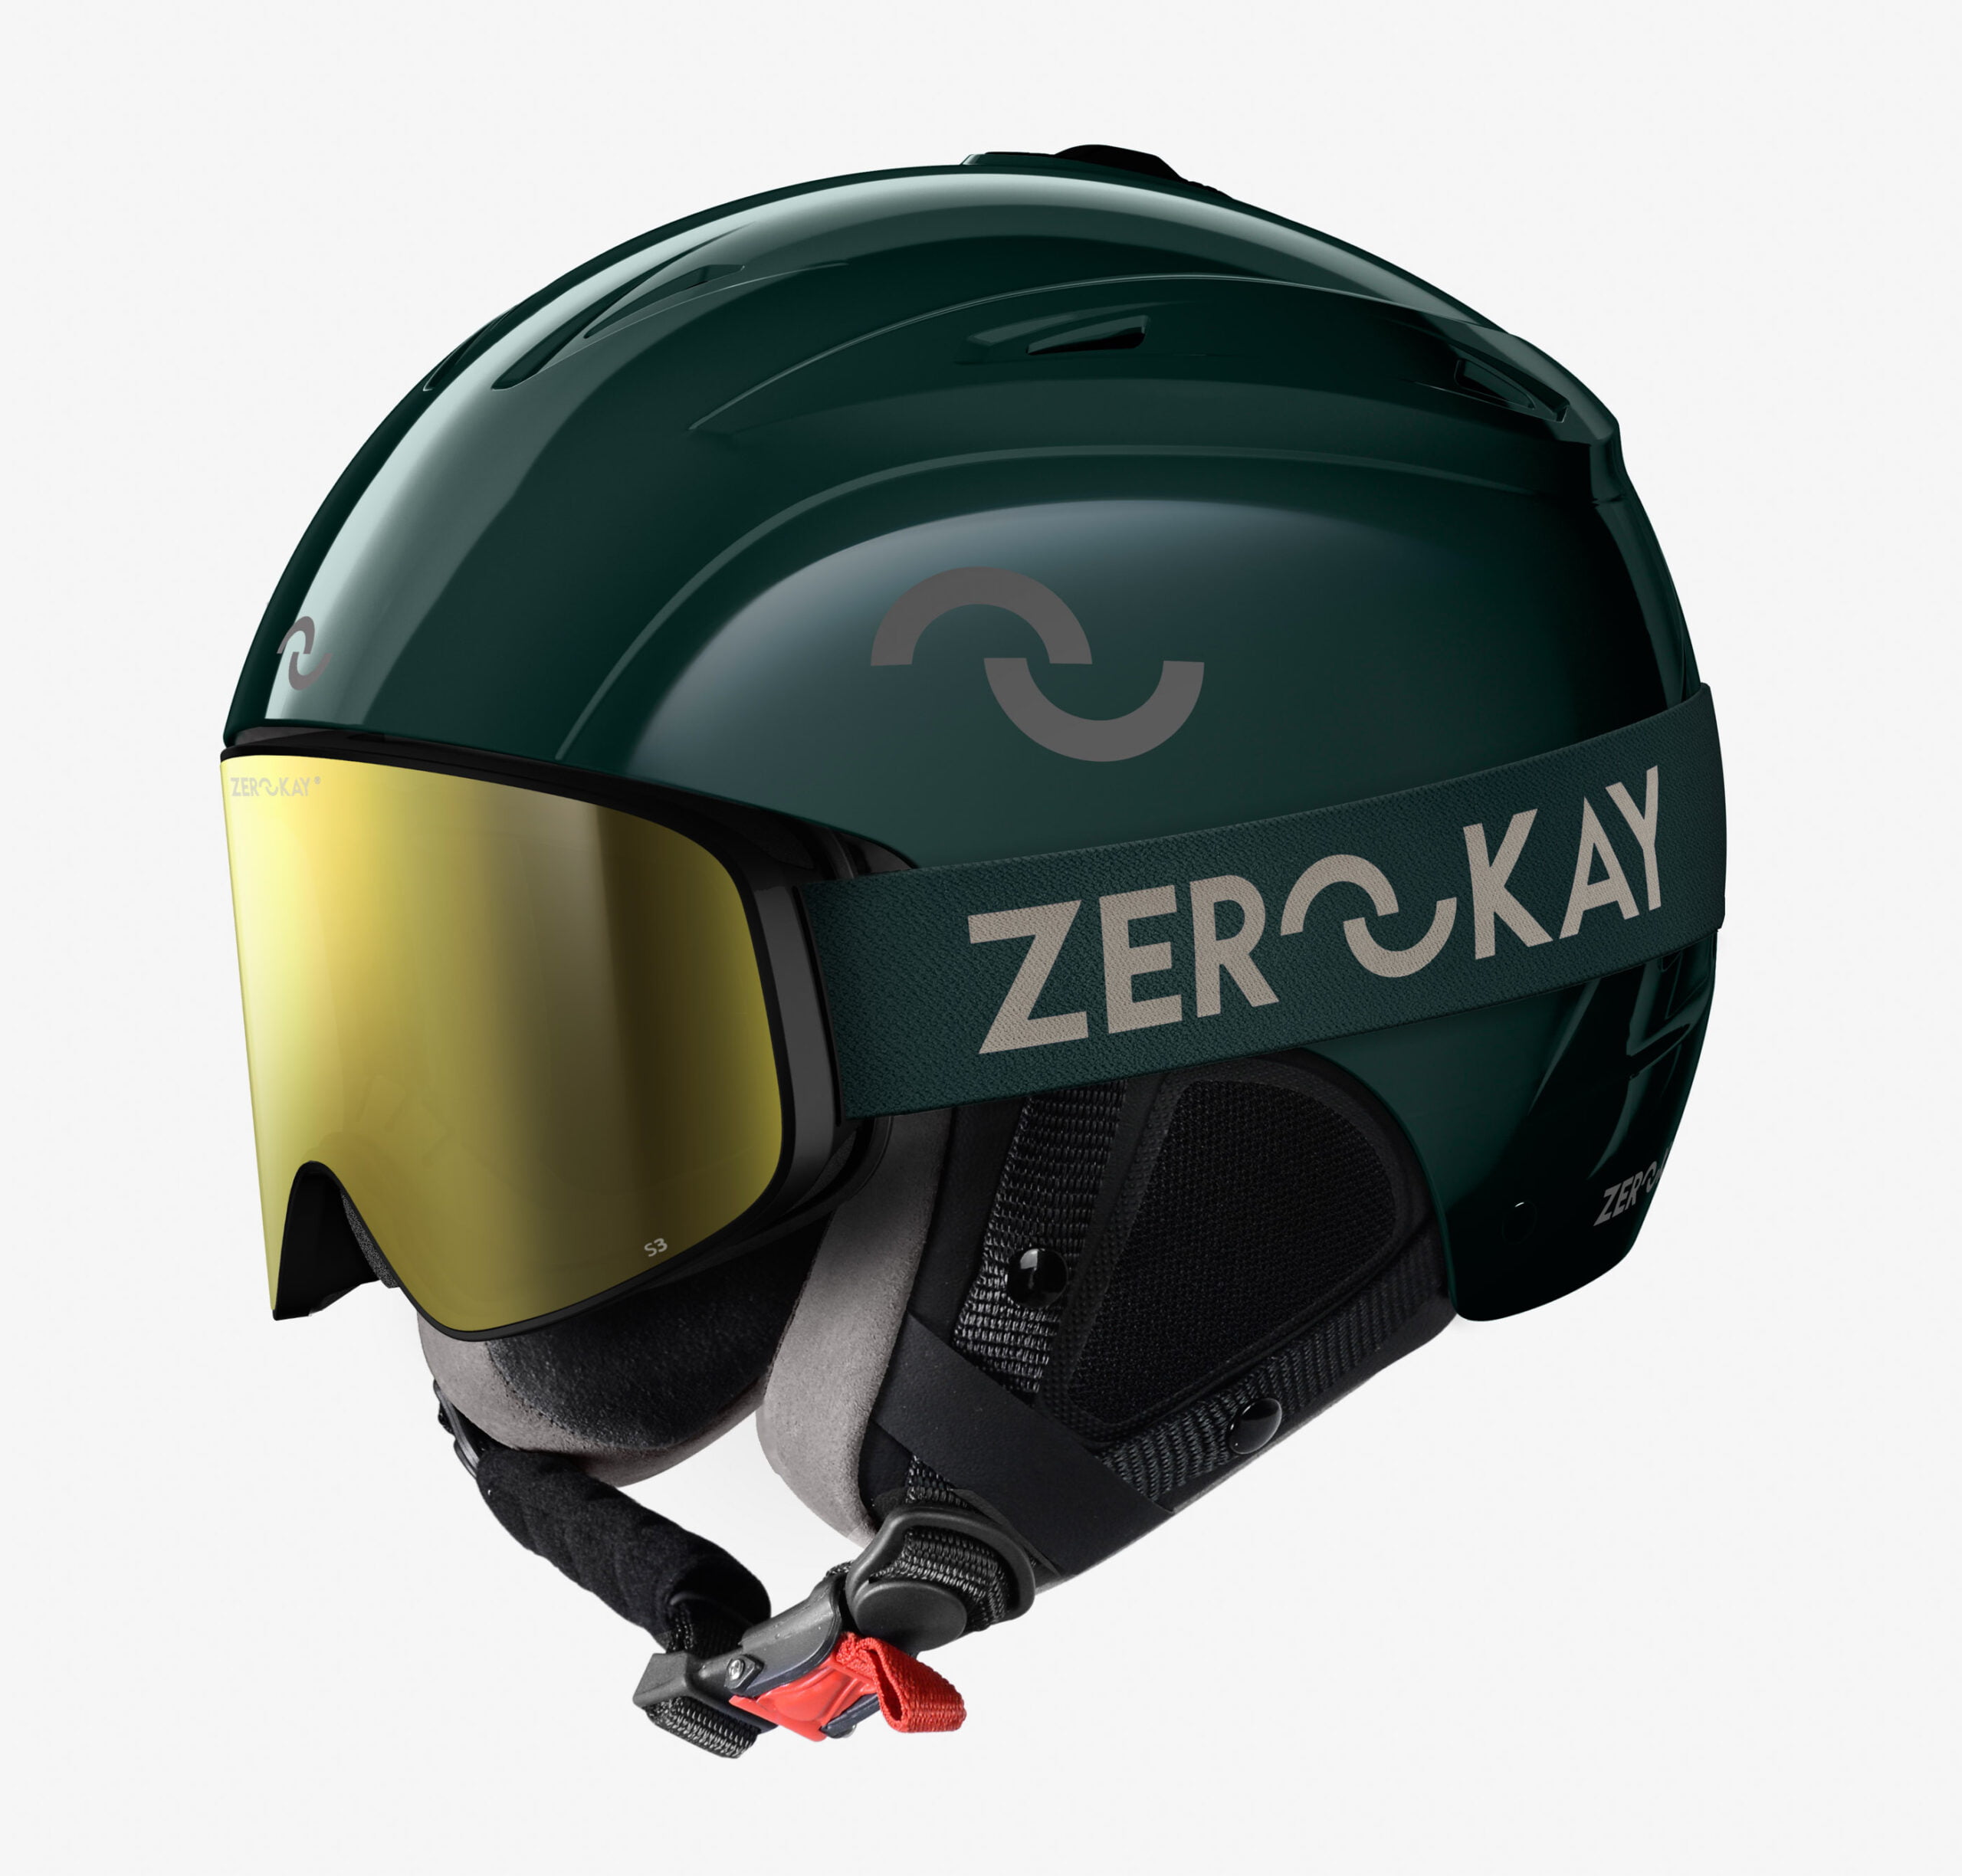 Unisex ski helmet and goggles set by Zerokay, featuring advanced protection and clear vision.